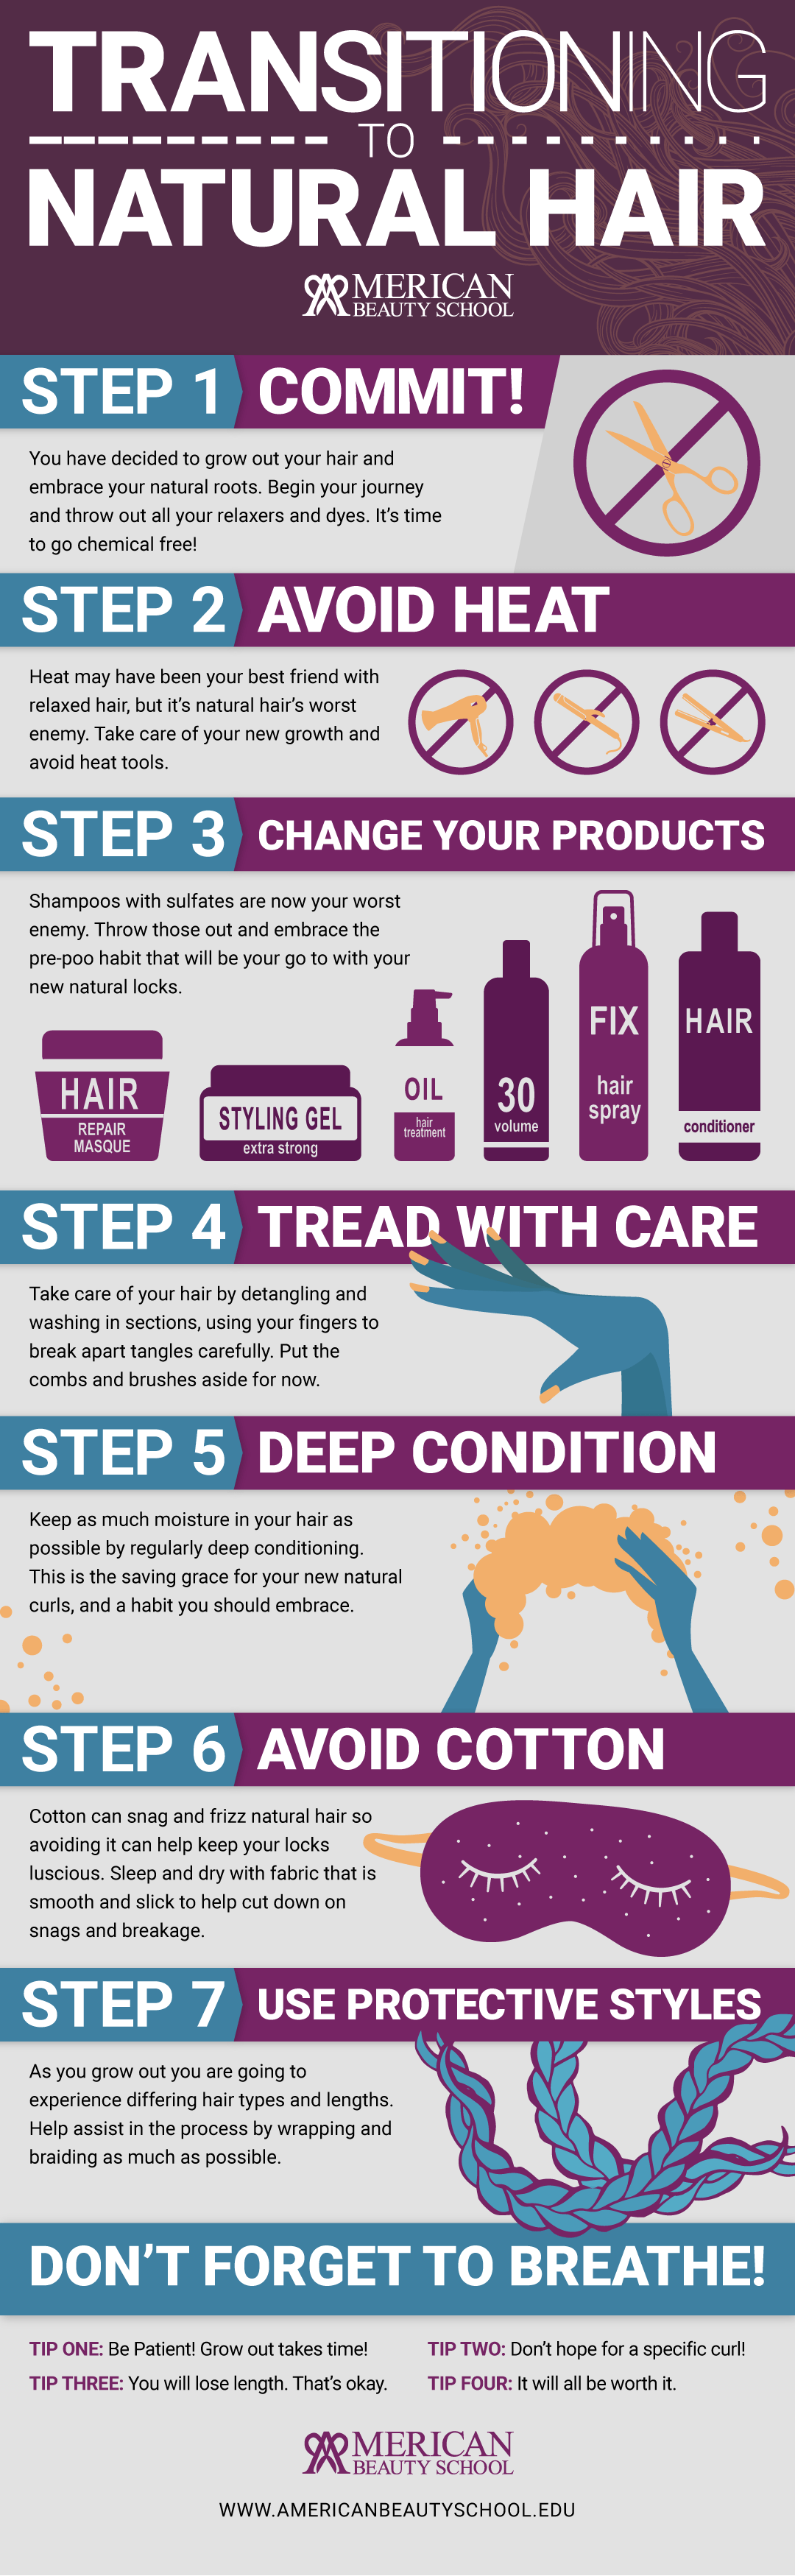 How To Transition To Natural Hair